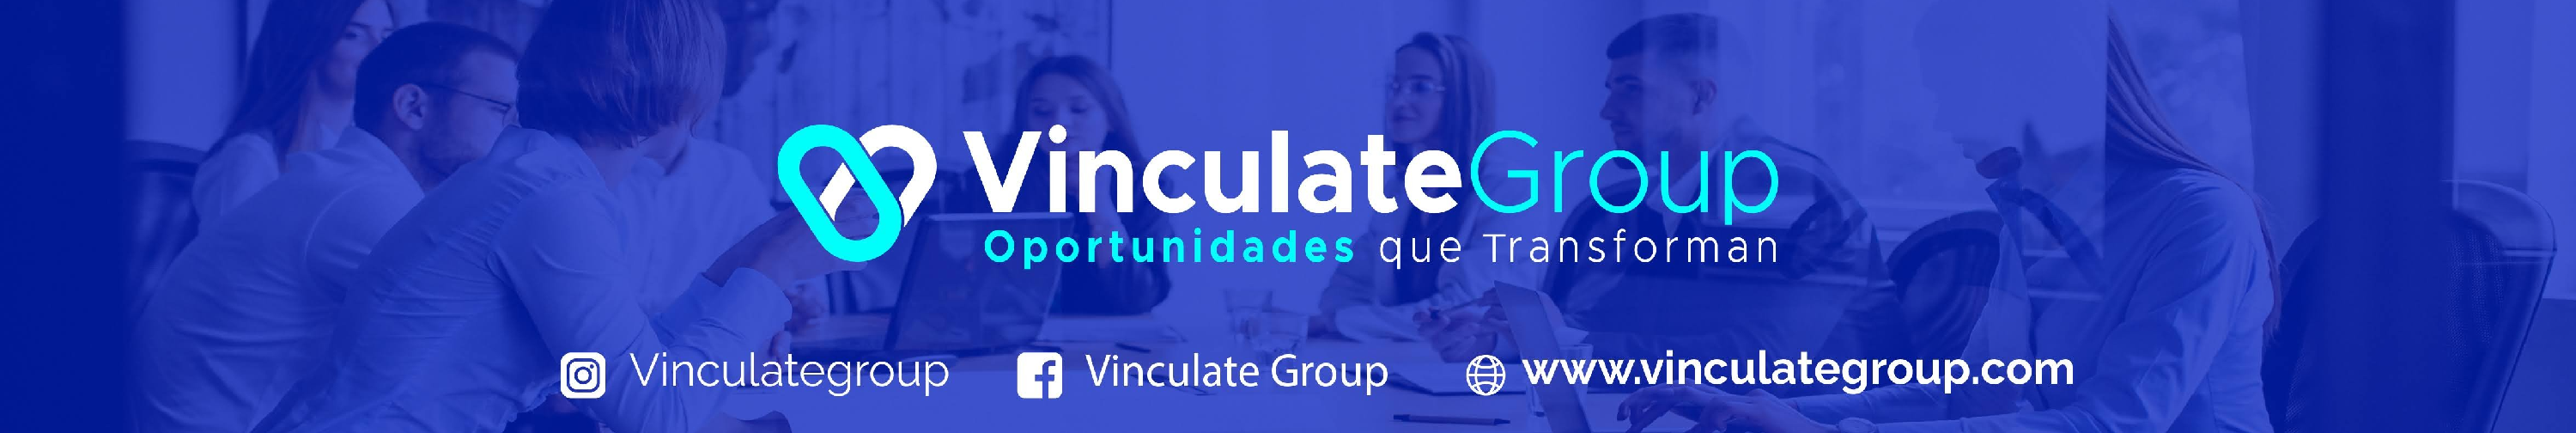 vinculate group background